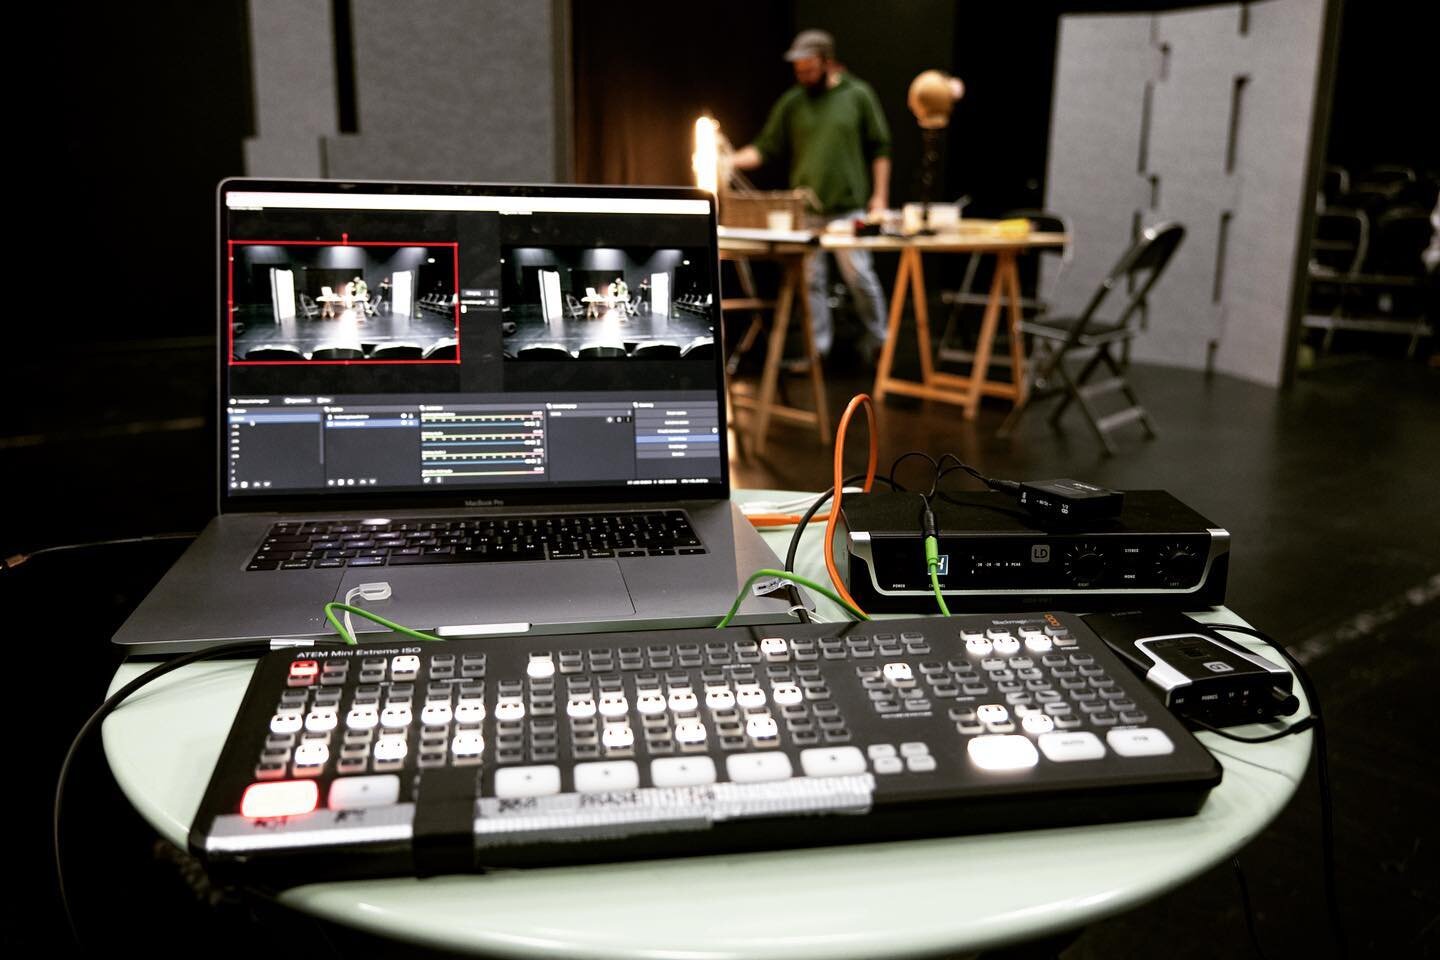 technical insight into our new rehearsal setup for 3d sound theatre

foto: @ben_immer 
#spatialaudio #3daudio #binaural #ambisonics #obs #theatre #play #rehearsals #sounddramaturgien #atemminipro @felixkruis #audioproduction